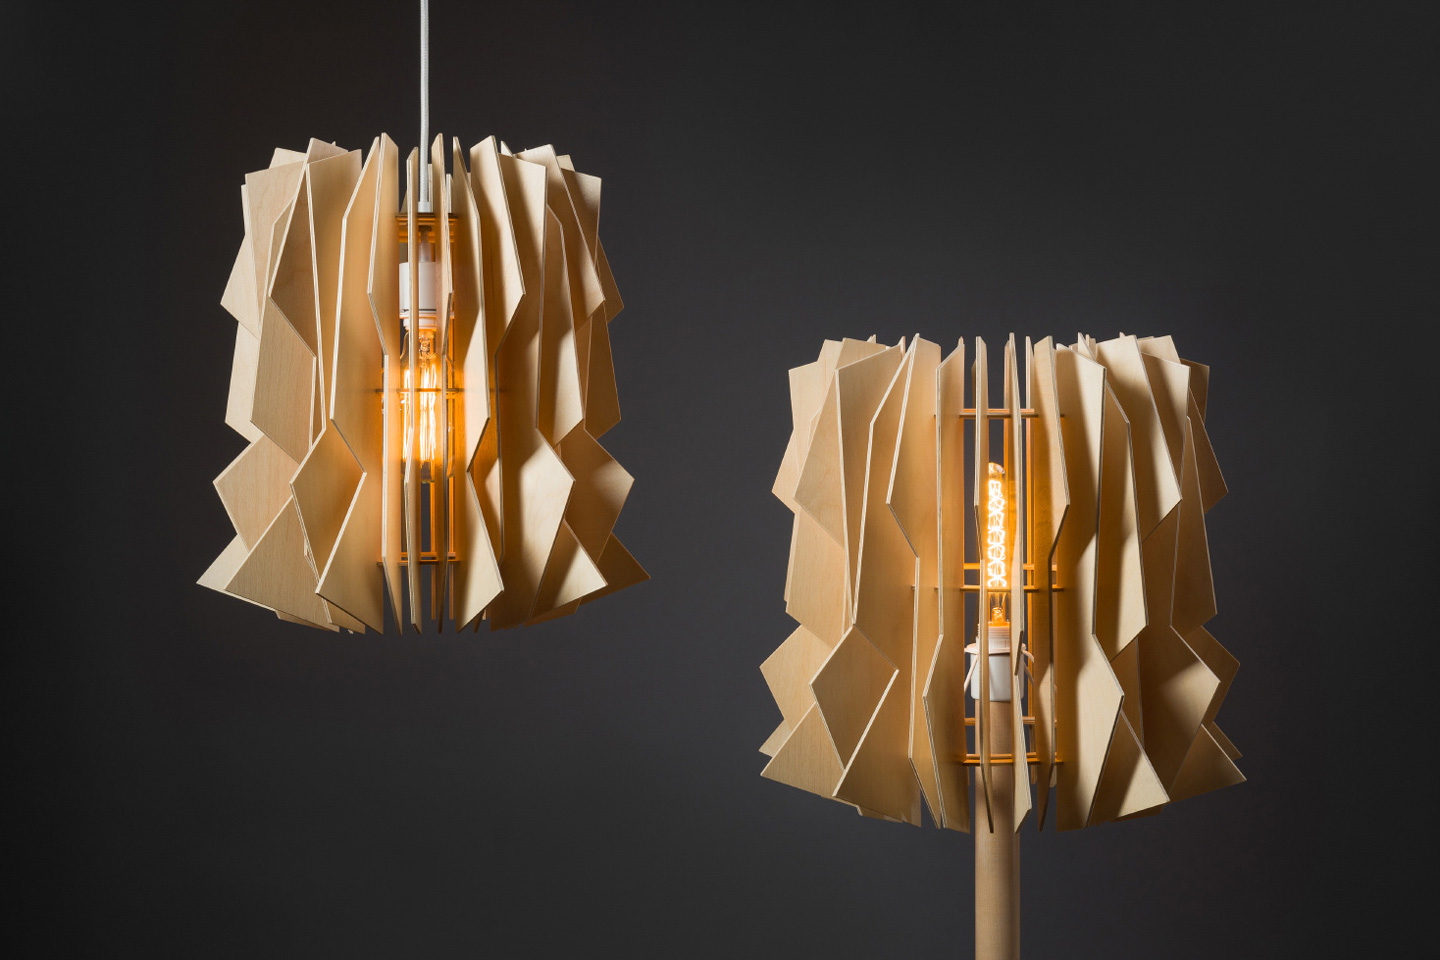 These laser-cut flat-packed wood panels assemble into a beautifully edgy tornado-inspired lampshade